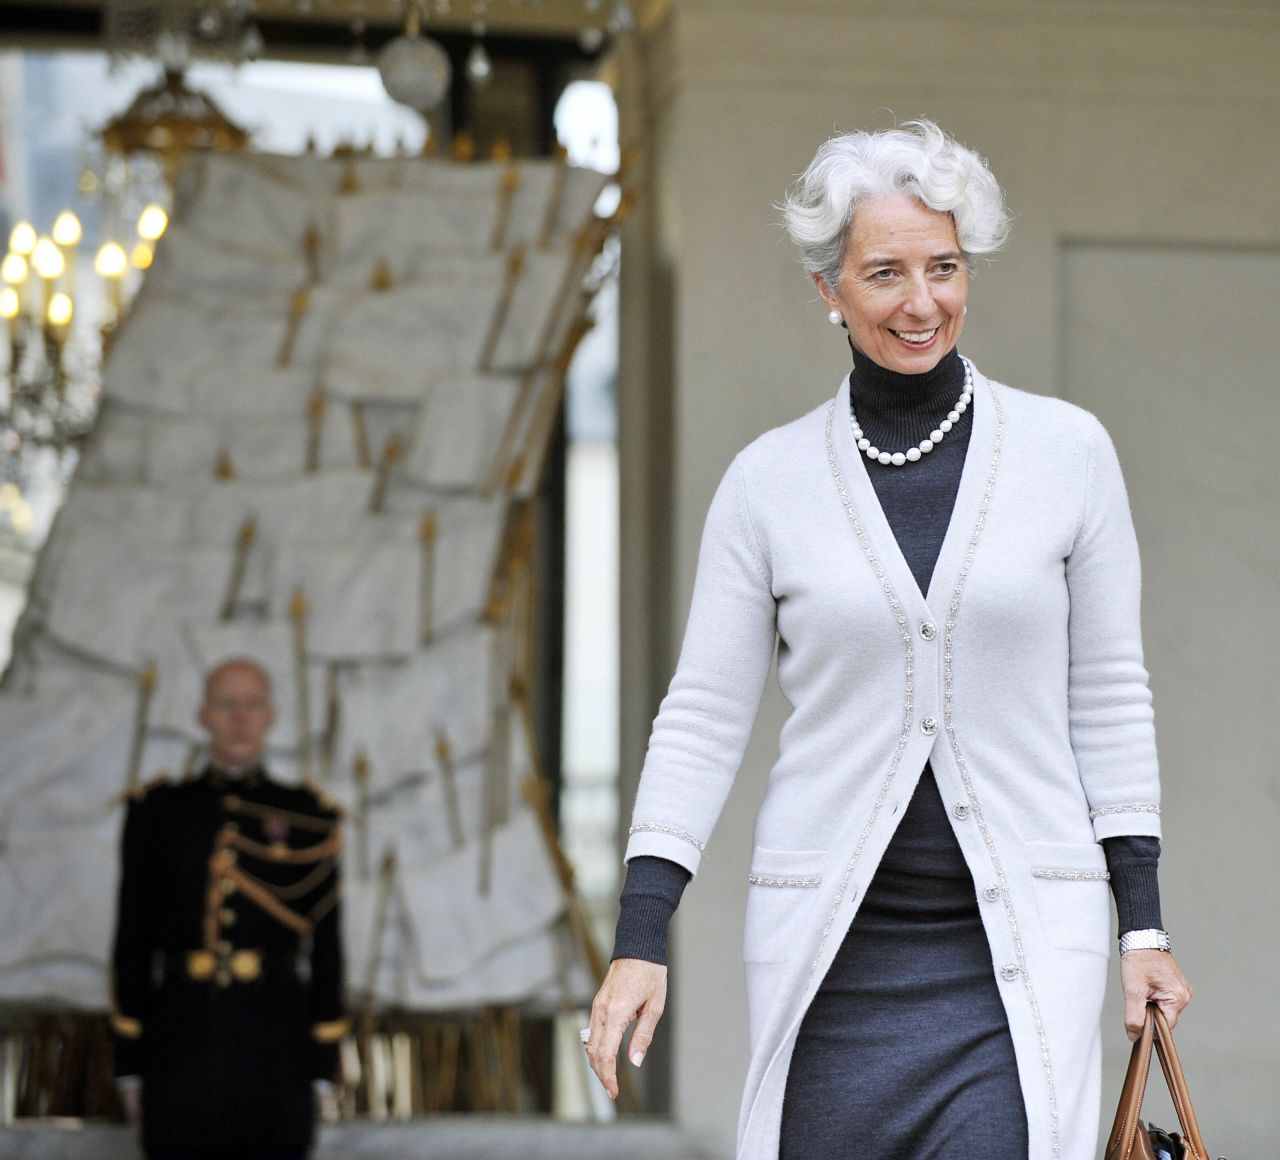 From July to December 2008, Lagarde also chaired the Economic and Financial Affairs Council (<a href="http://www.consilium.europa.eu/council/council-configurations" target="_blank" target="_blank">ECOFIN)</a>. <br /><br />The council brings together all the finance ministers of the EU's member-states to discuss areas such as economic policy coordination, financial markets and economic relations with third world countries. <br />